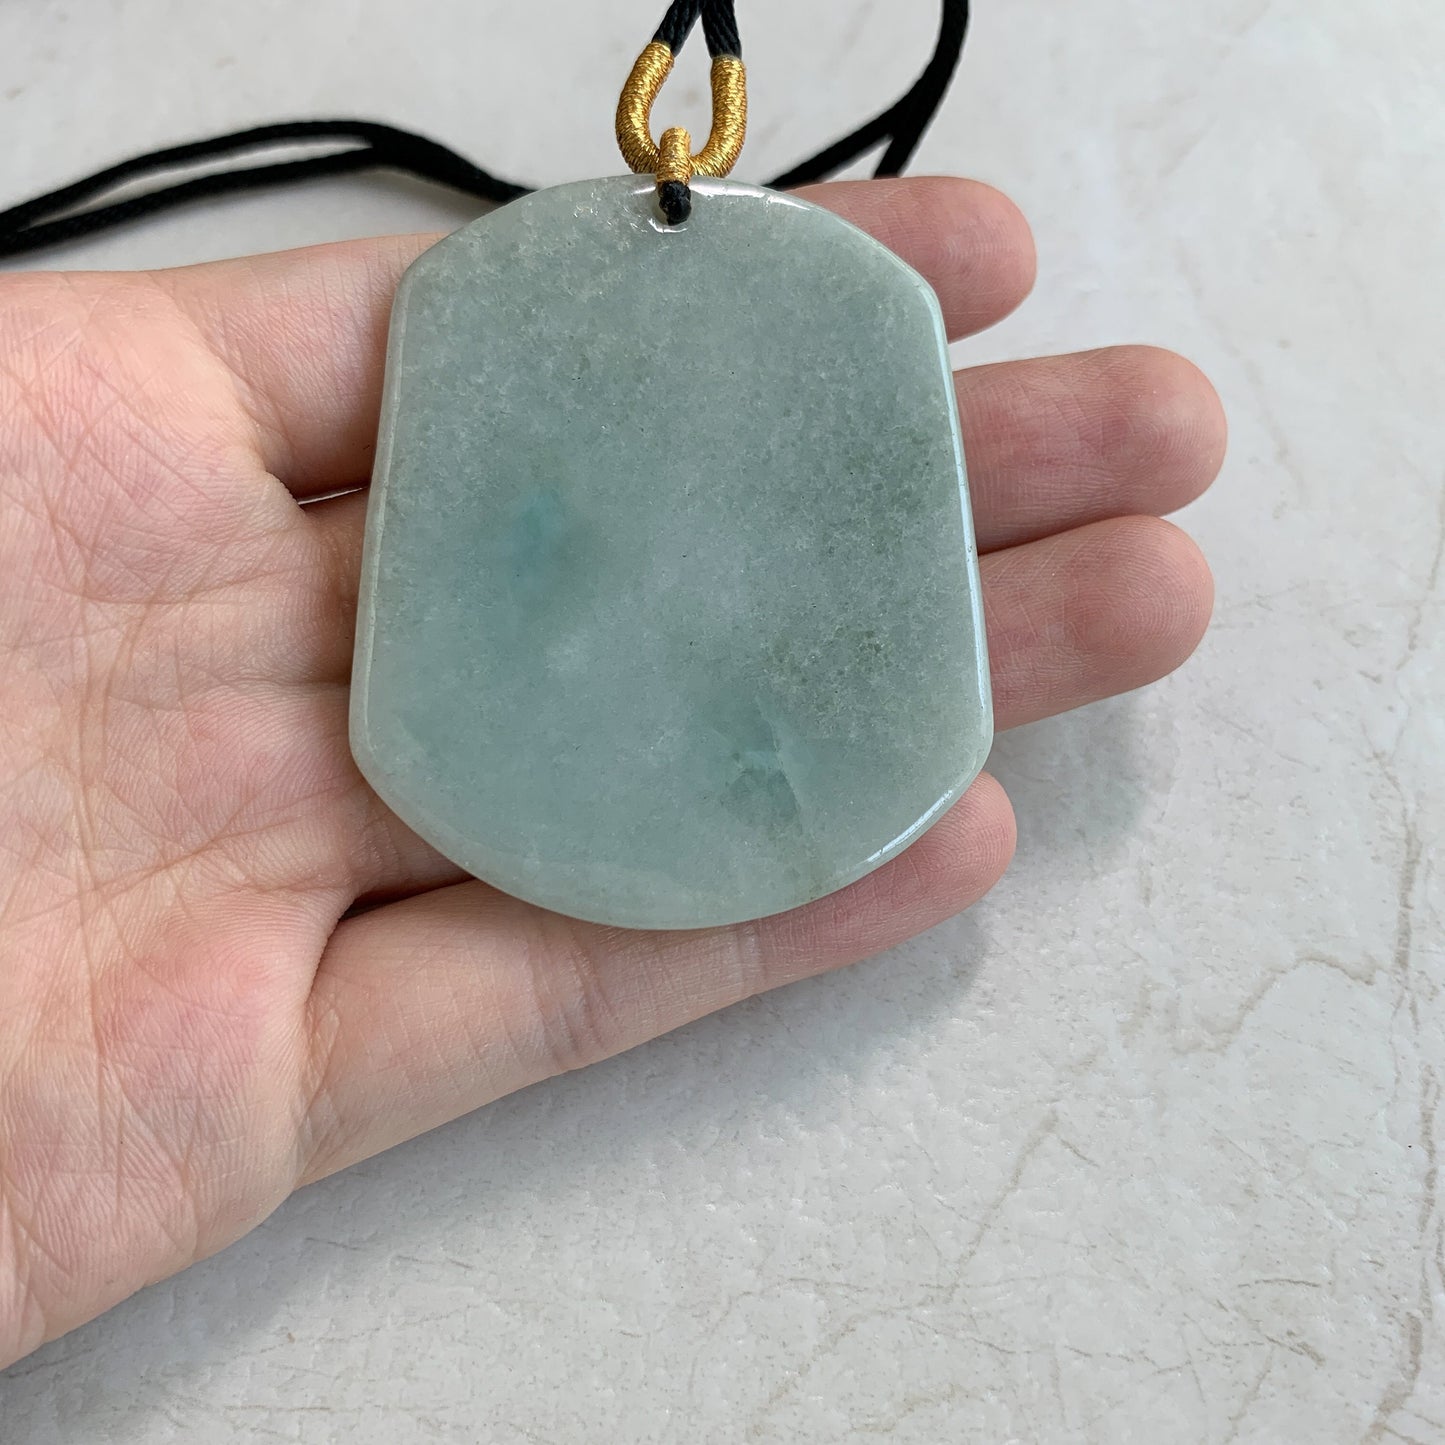 Jadeite Jade Landscape Mountain Forest River Scenery Hand Carved Pendant Necklace, YJ-0321-0437902 - AriaDesignCollection